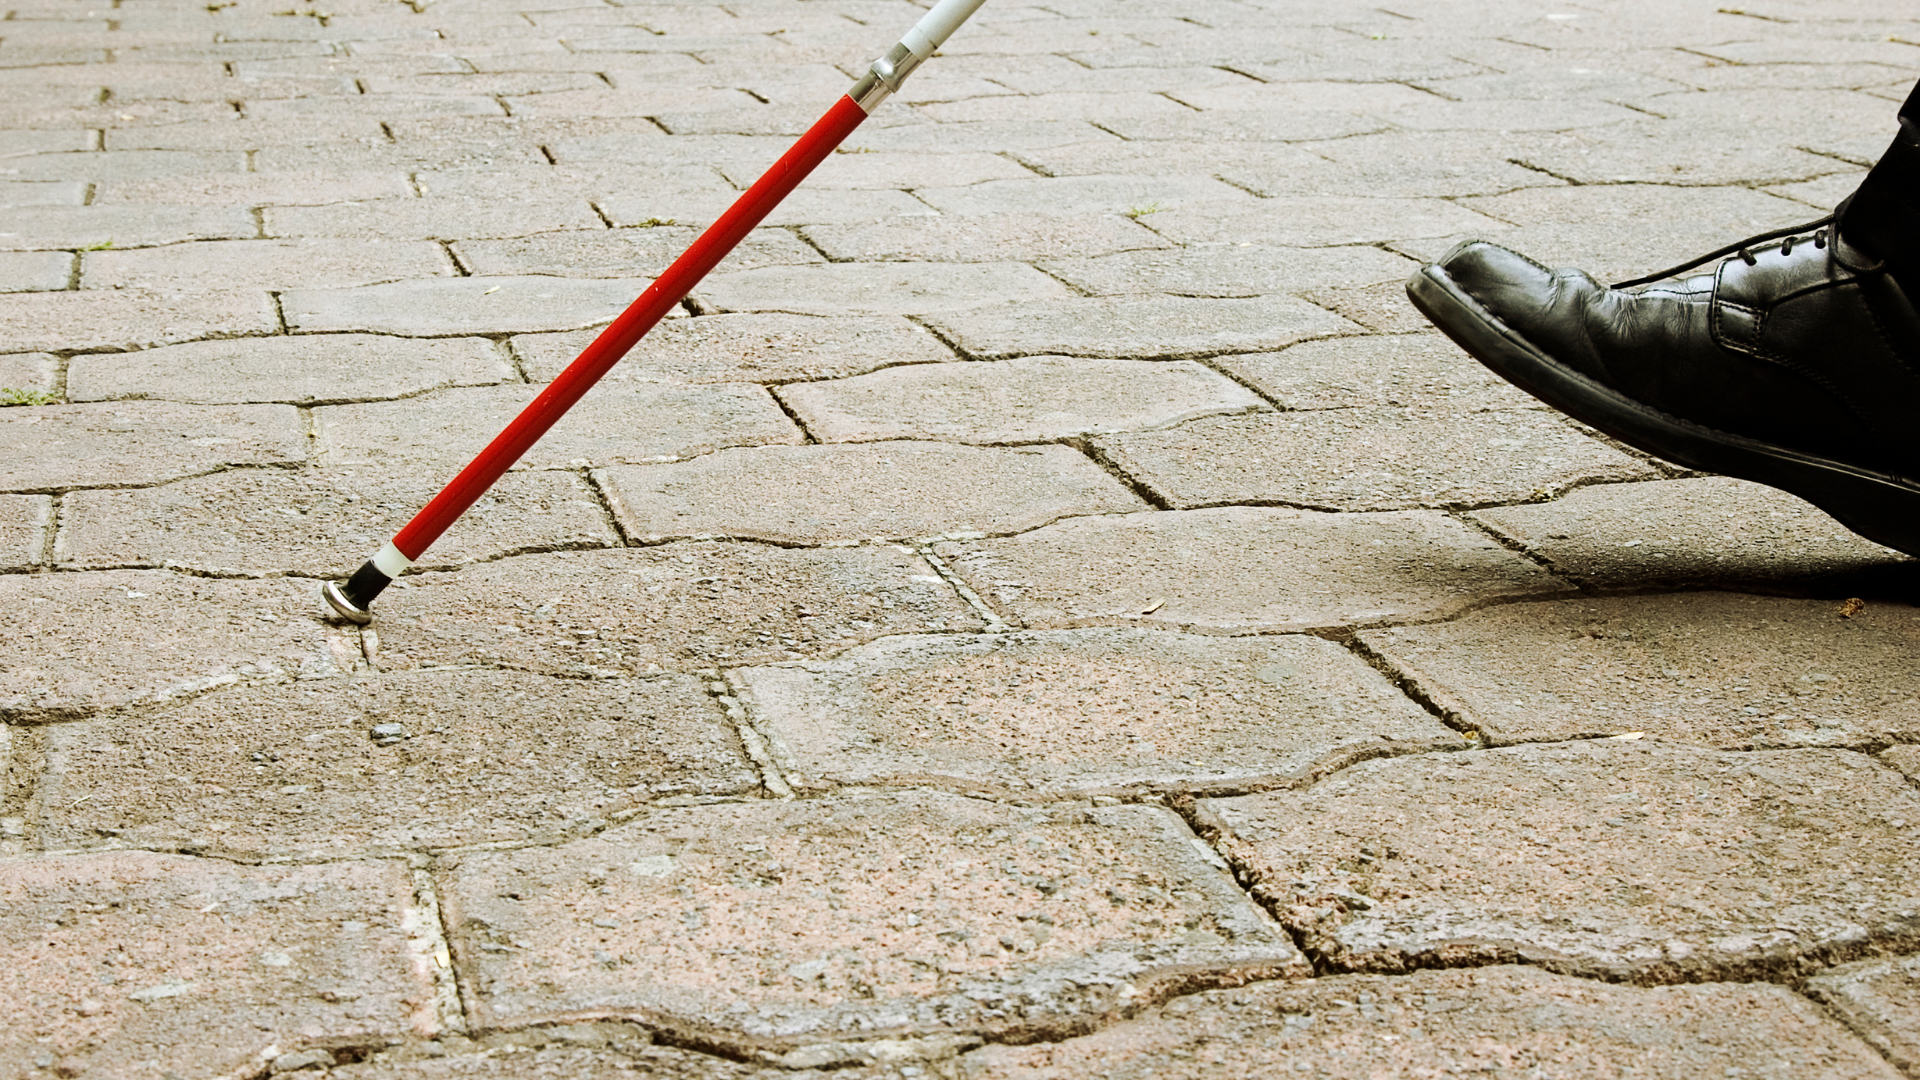 Choosing a White Cane - Leader Dogs for the Blind